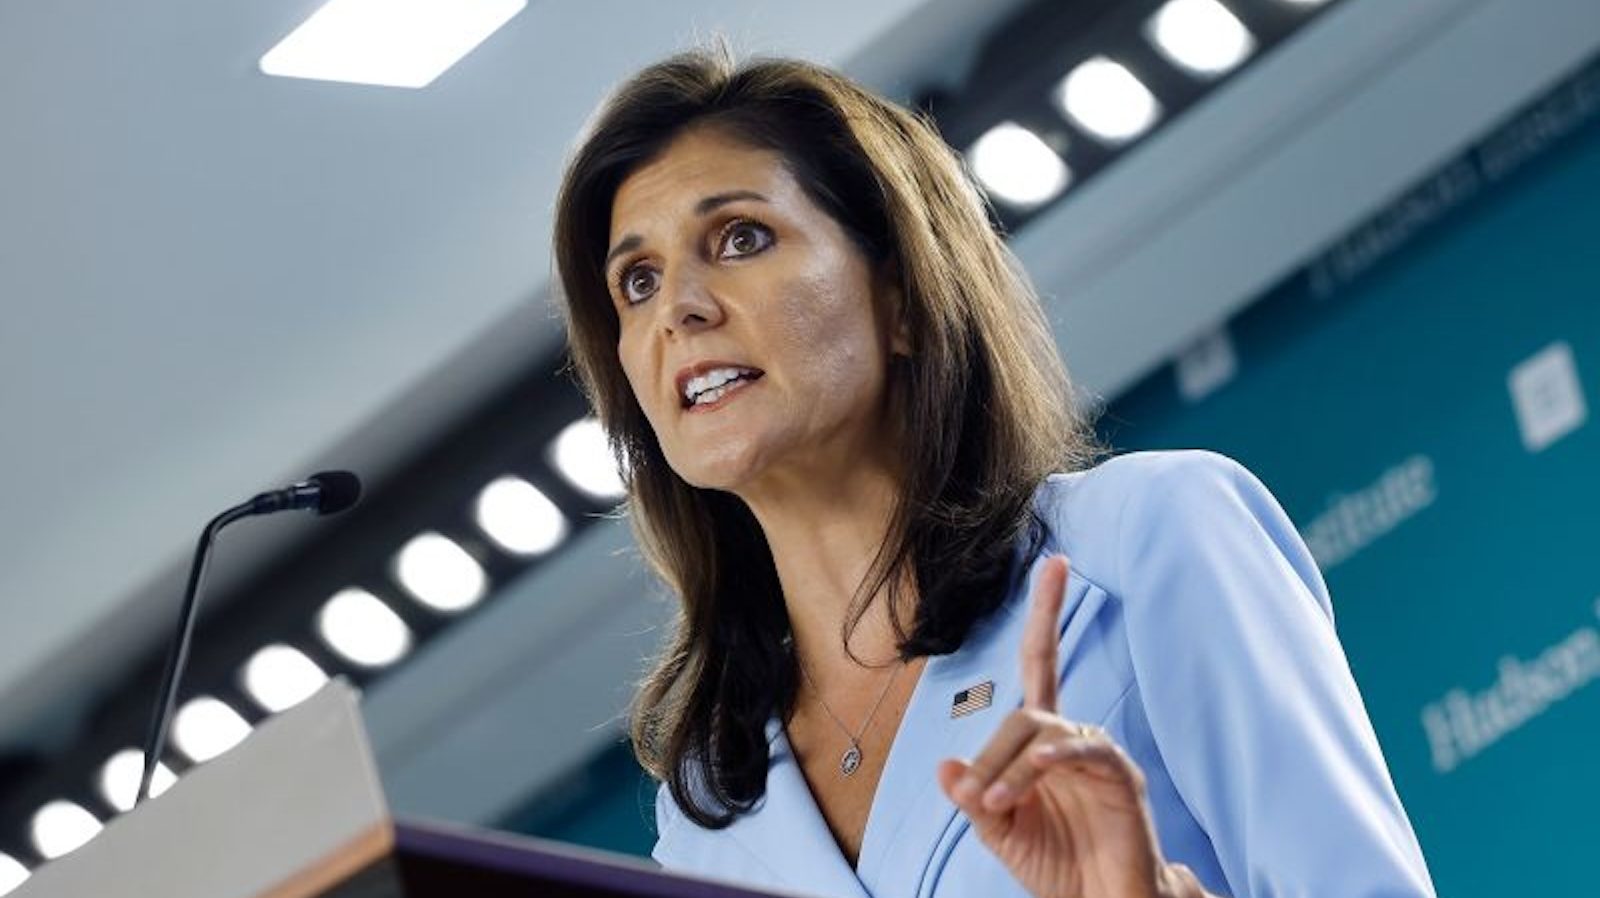 Nikki Haley will vote for Trump’s “chaos” which she has beforehand attacked